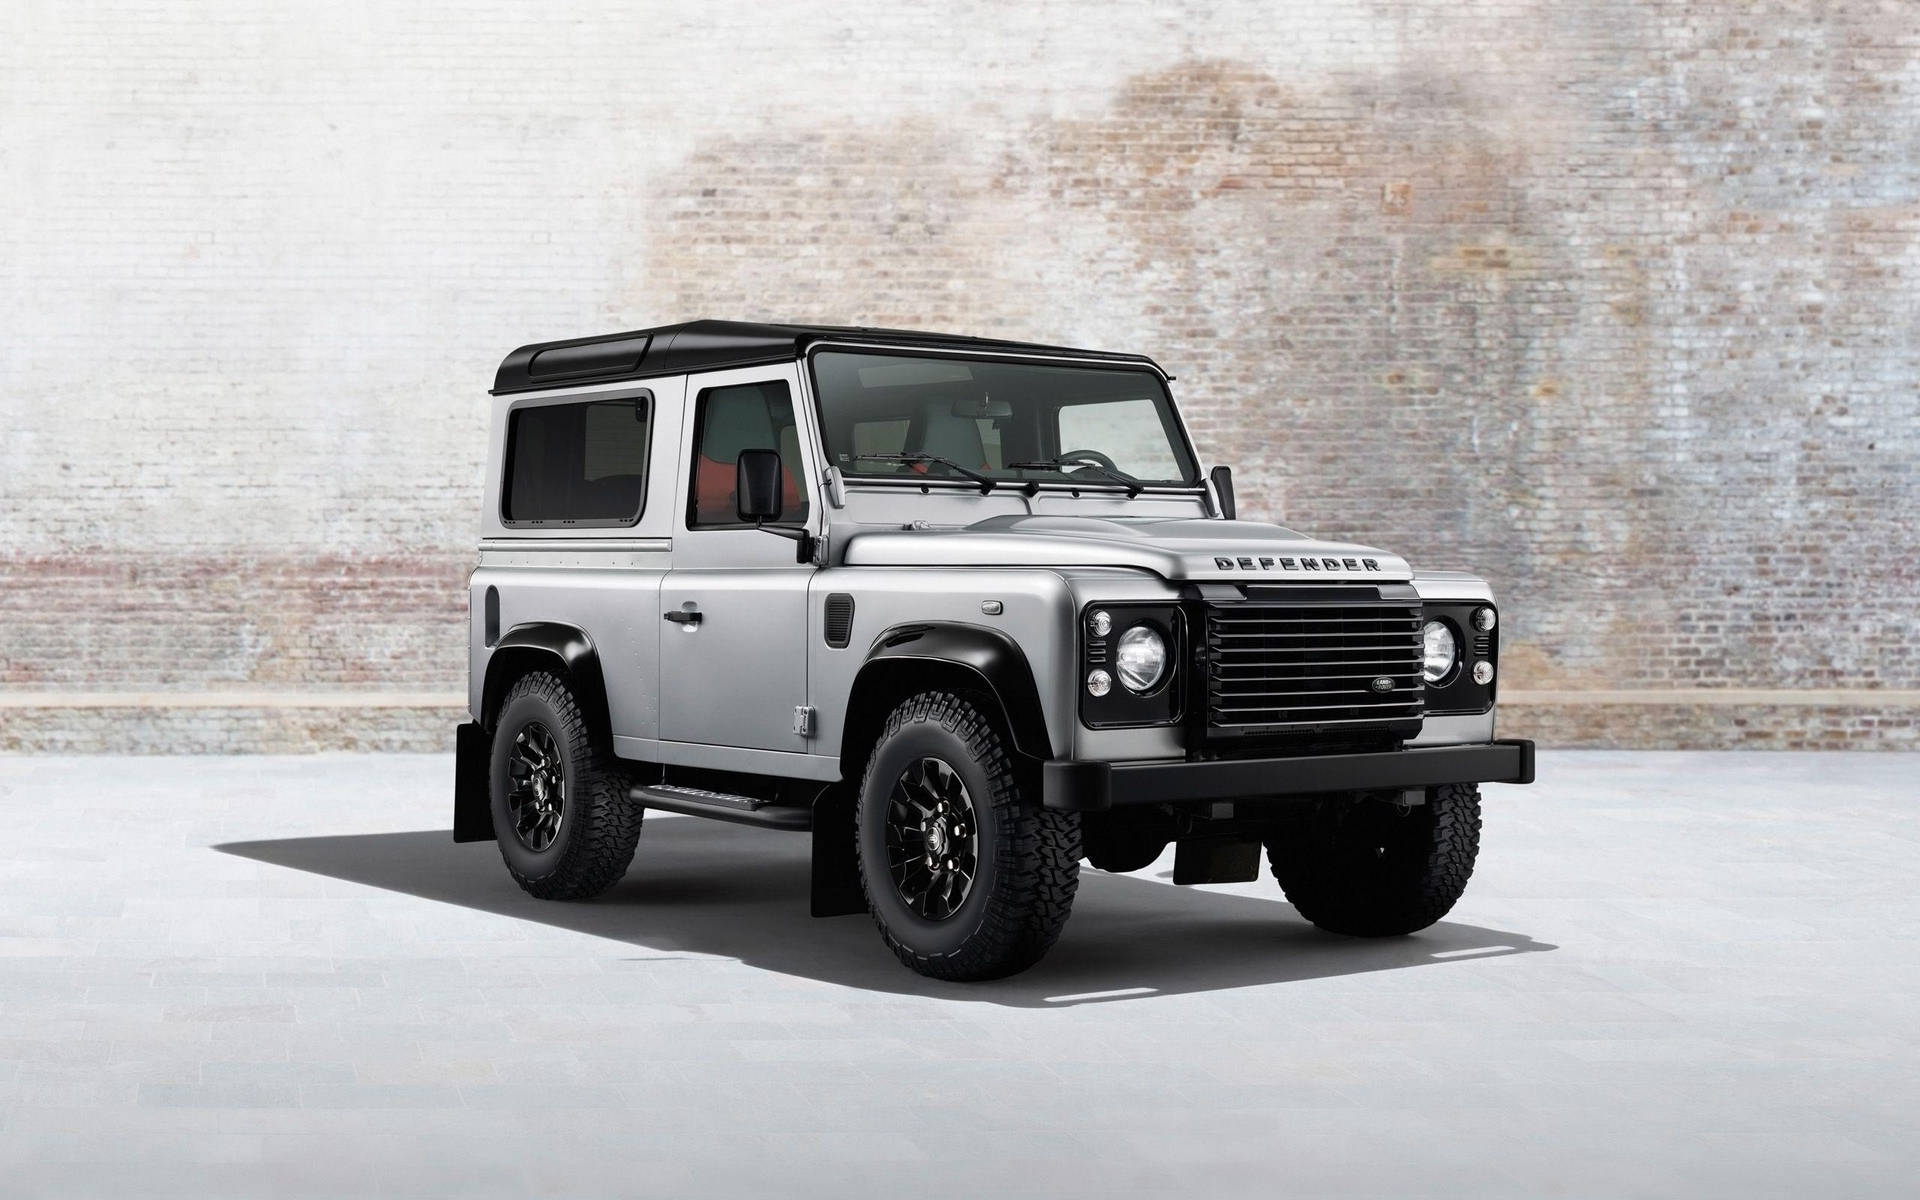 Free Land Rover Wallpaper Downloads, [100+] Land Rover Wallpapers for FREE  